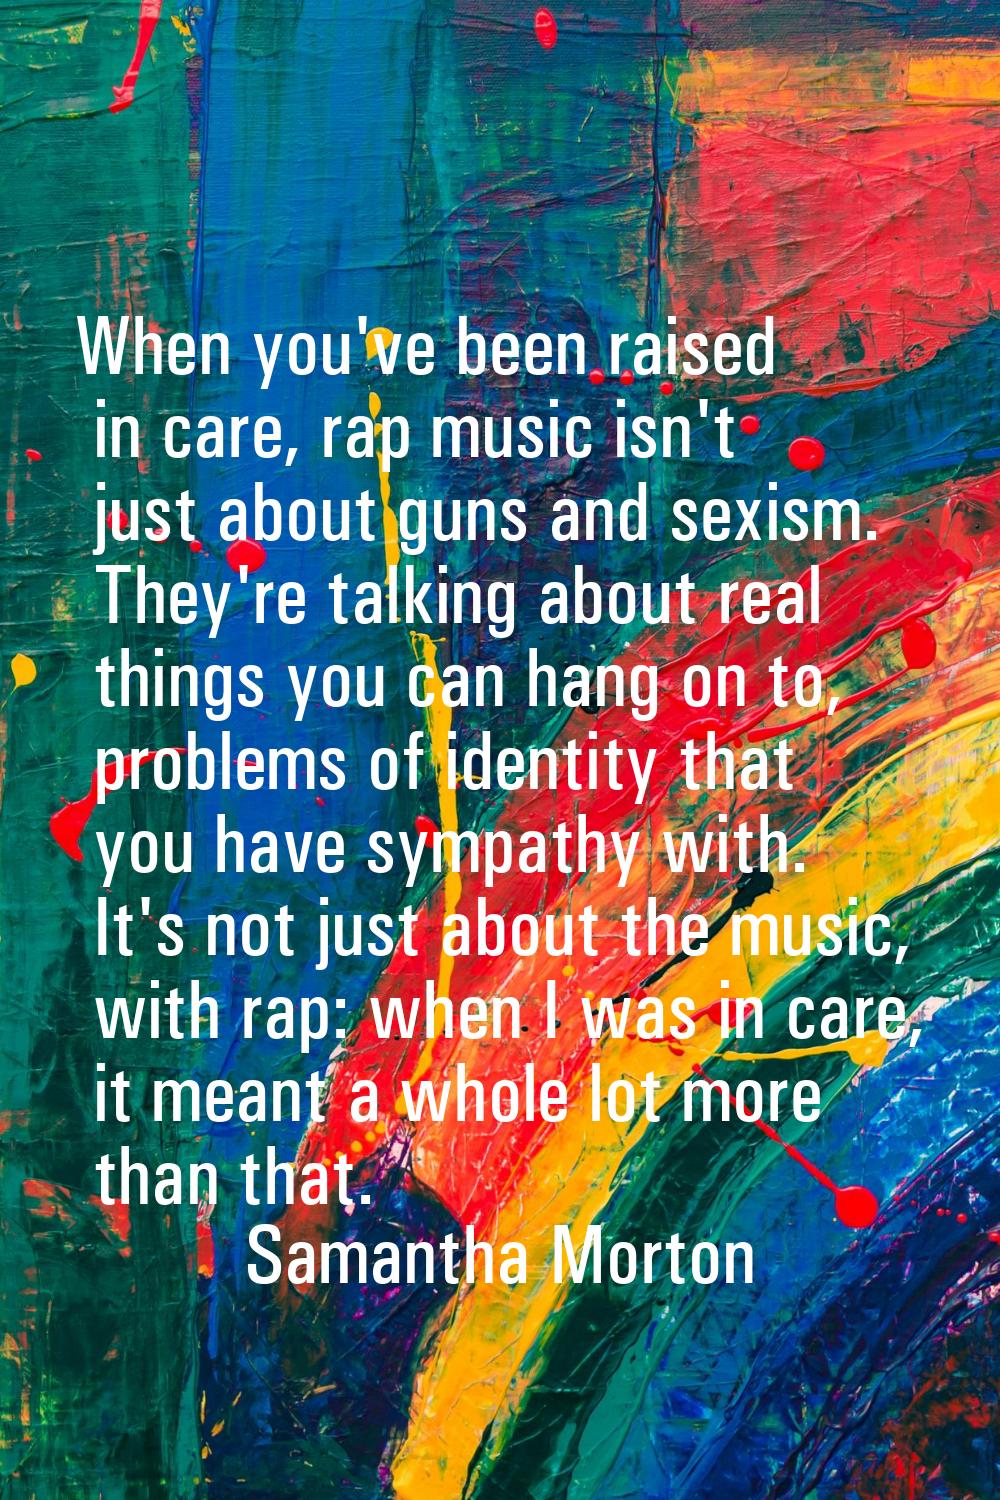 When you've been raised in care, rap music isn't just about guns and sexism. They're talking about 